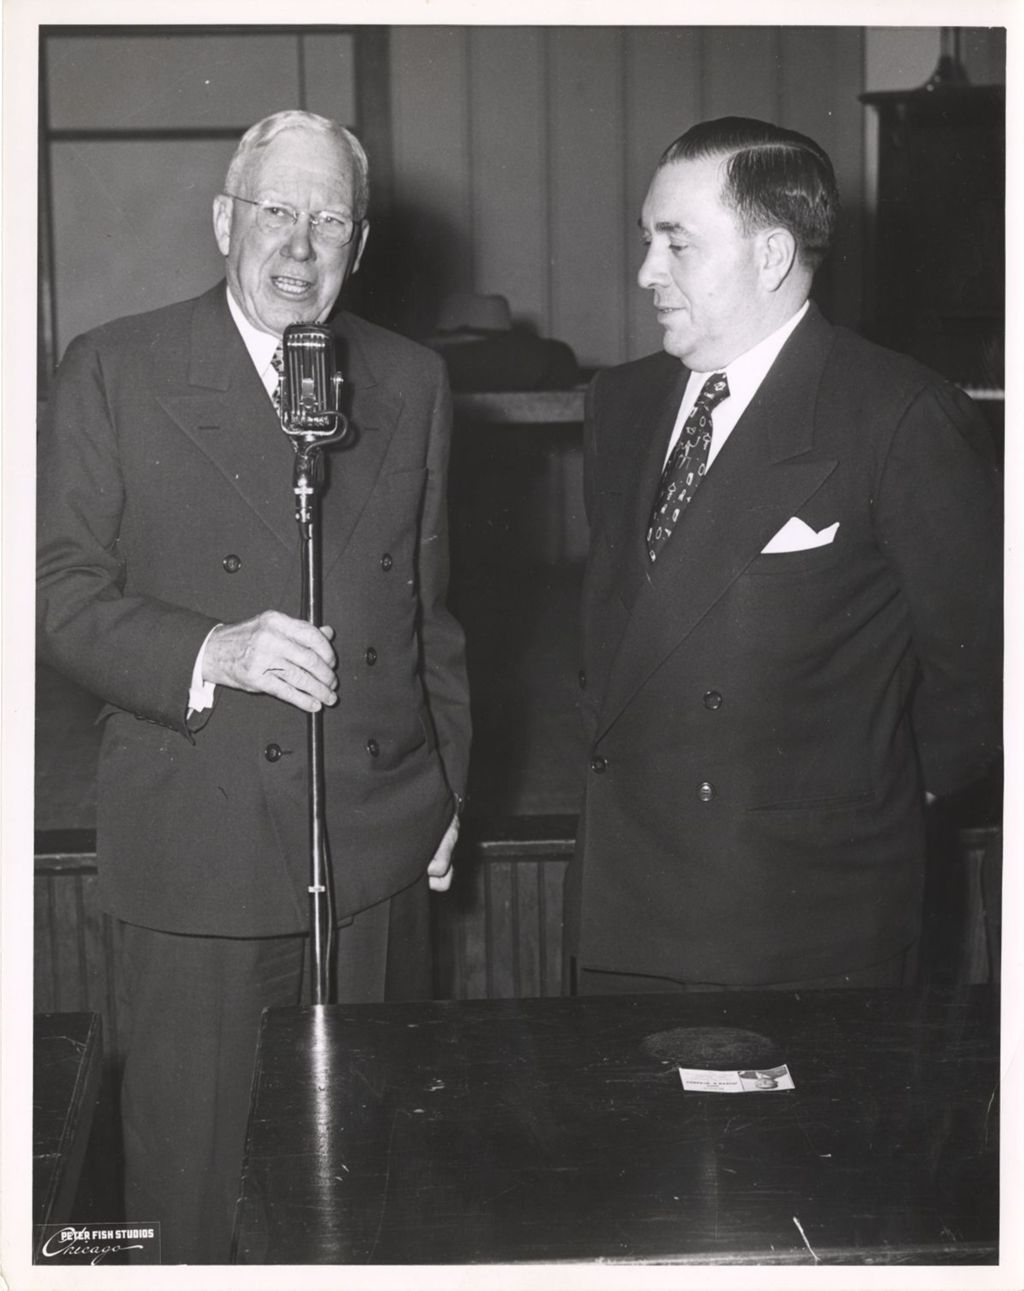 Miniature of Richard J. Daley and a man at a microphone